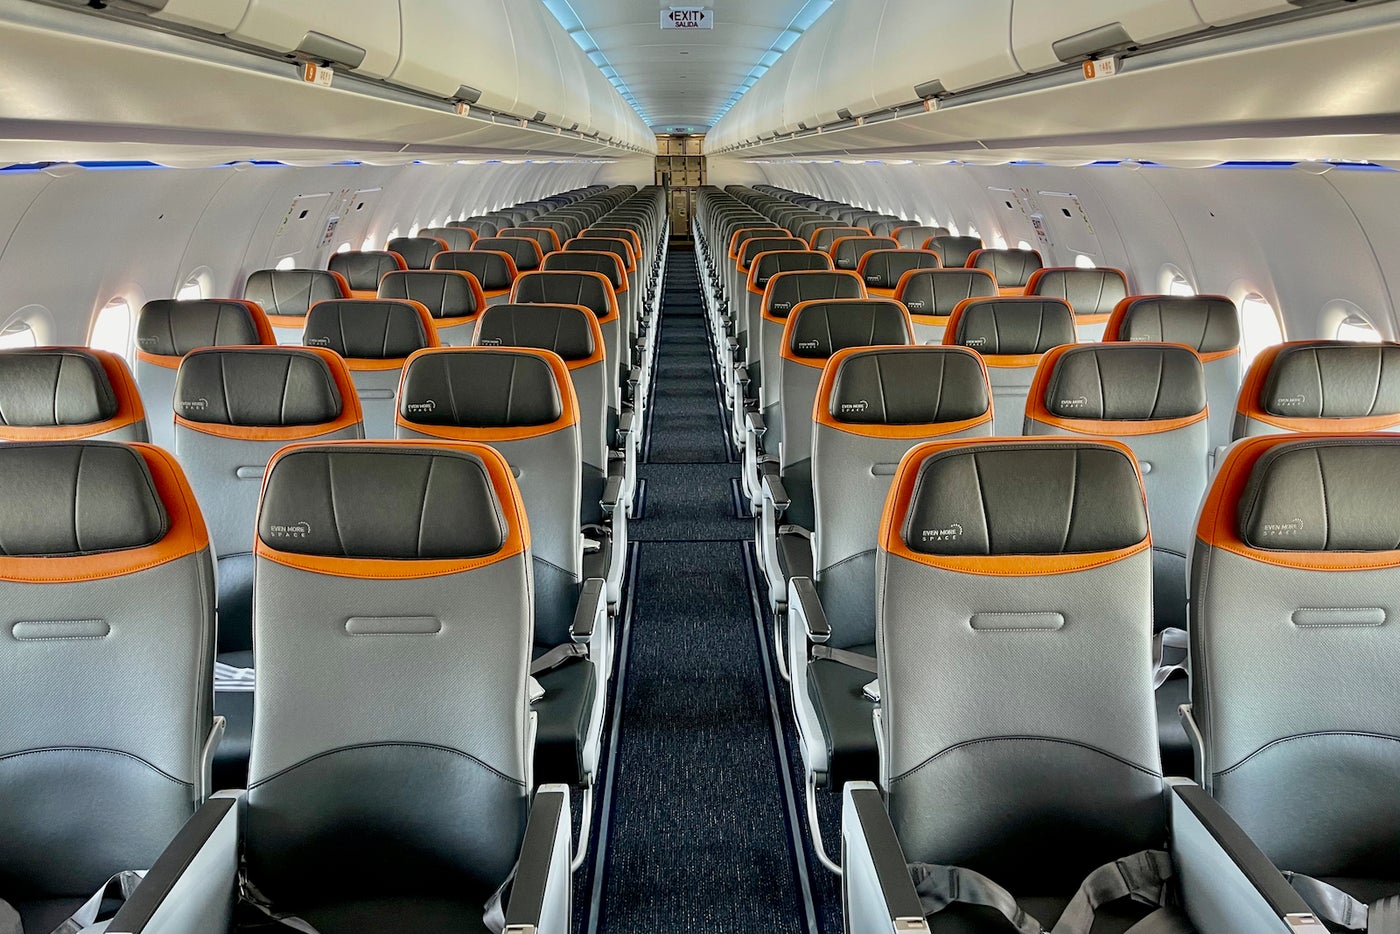 touring-jetblue-s-new-coach-cabin-on-the-airbus-a321neo